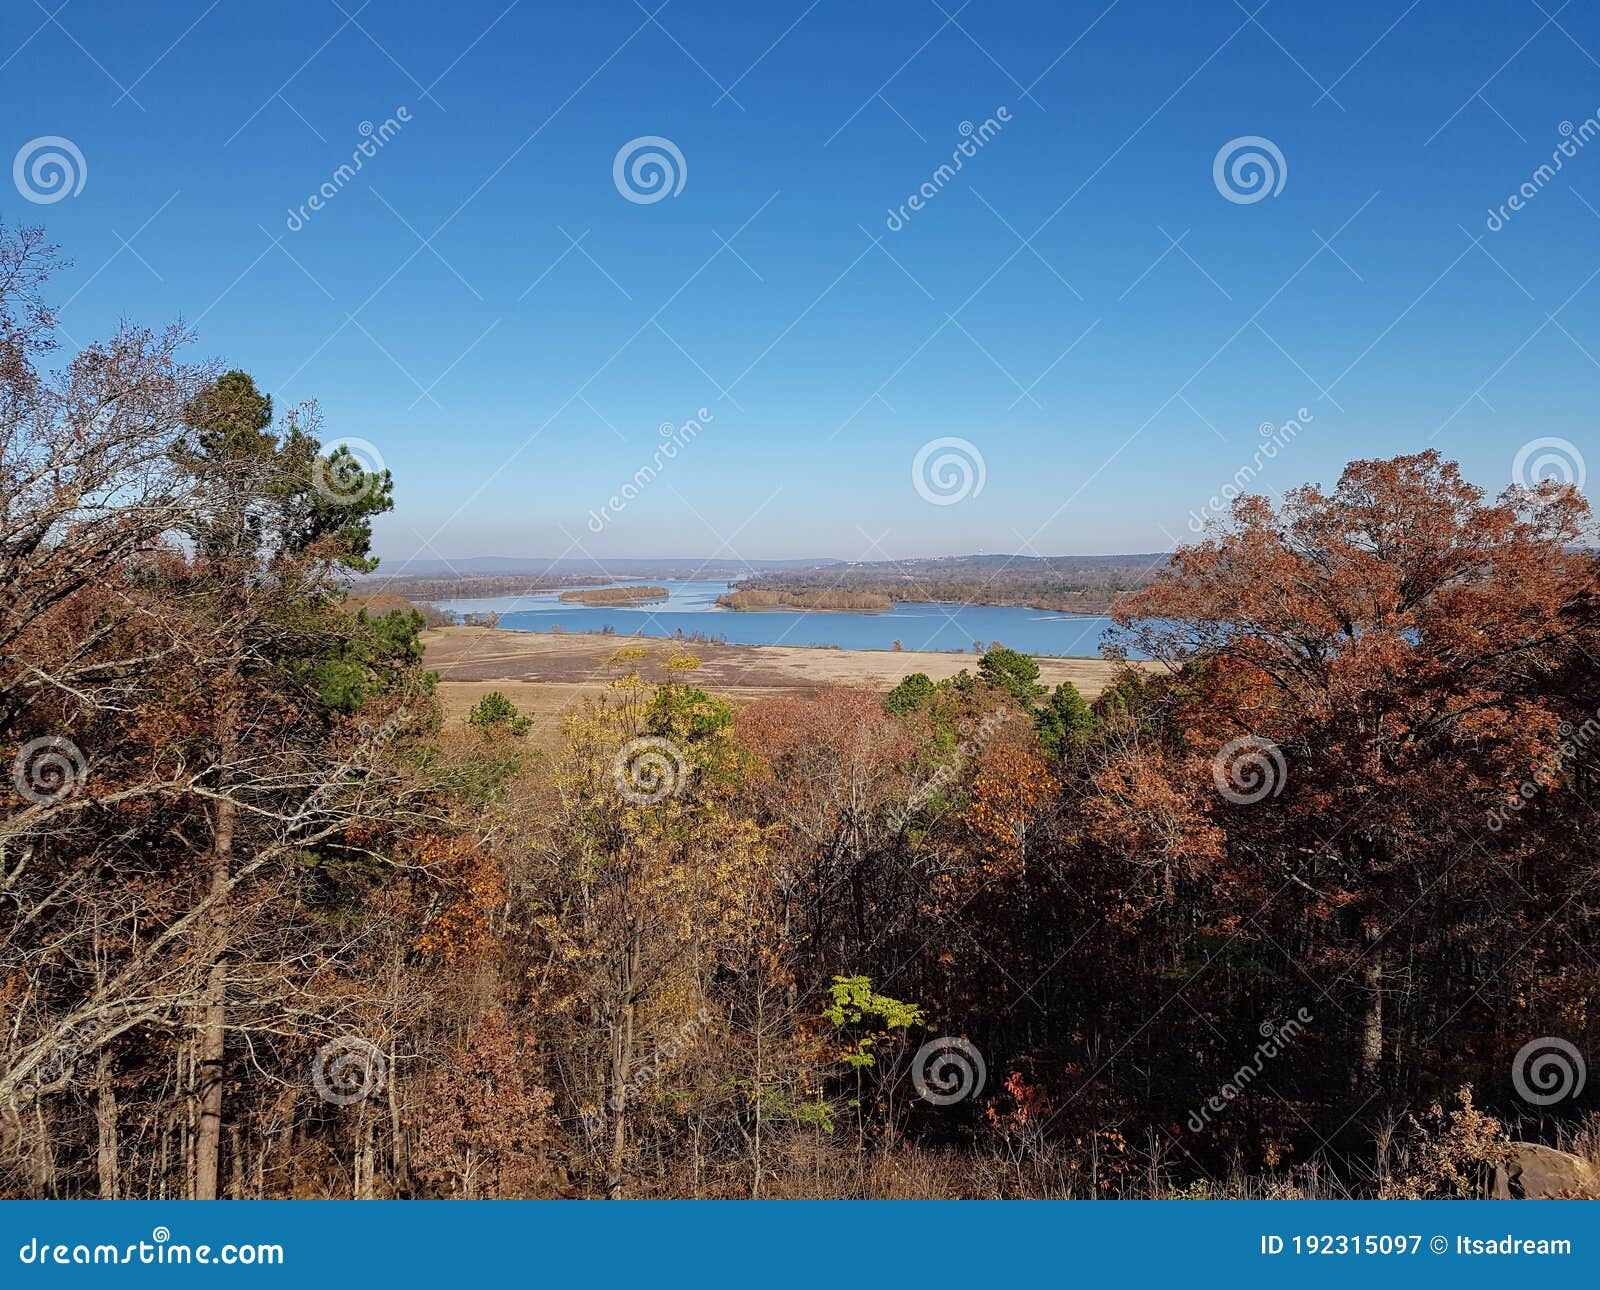 view of lake maumelle from one of the the viewing decks of pinnacle mountain state park